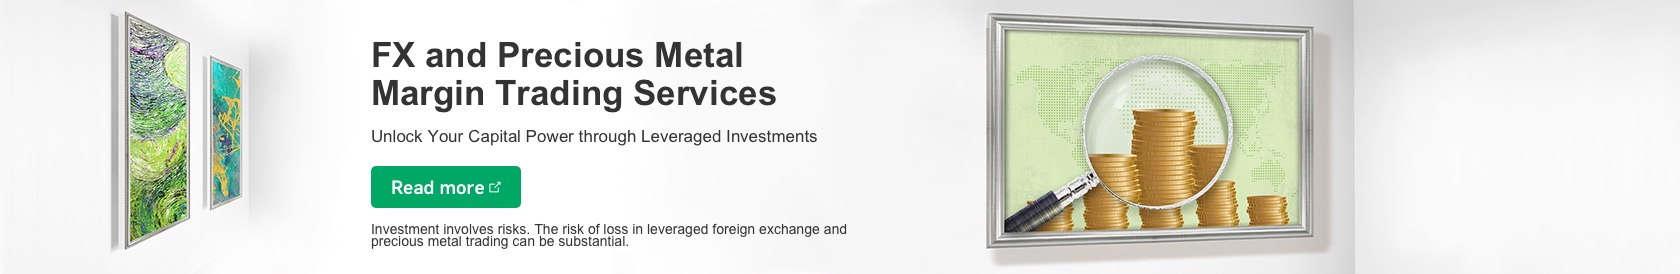 Read more, FX and Precious Metal Margin Trading Services